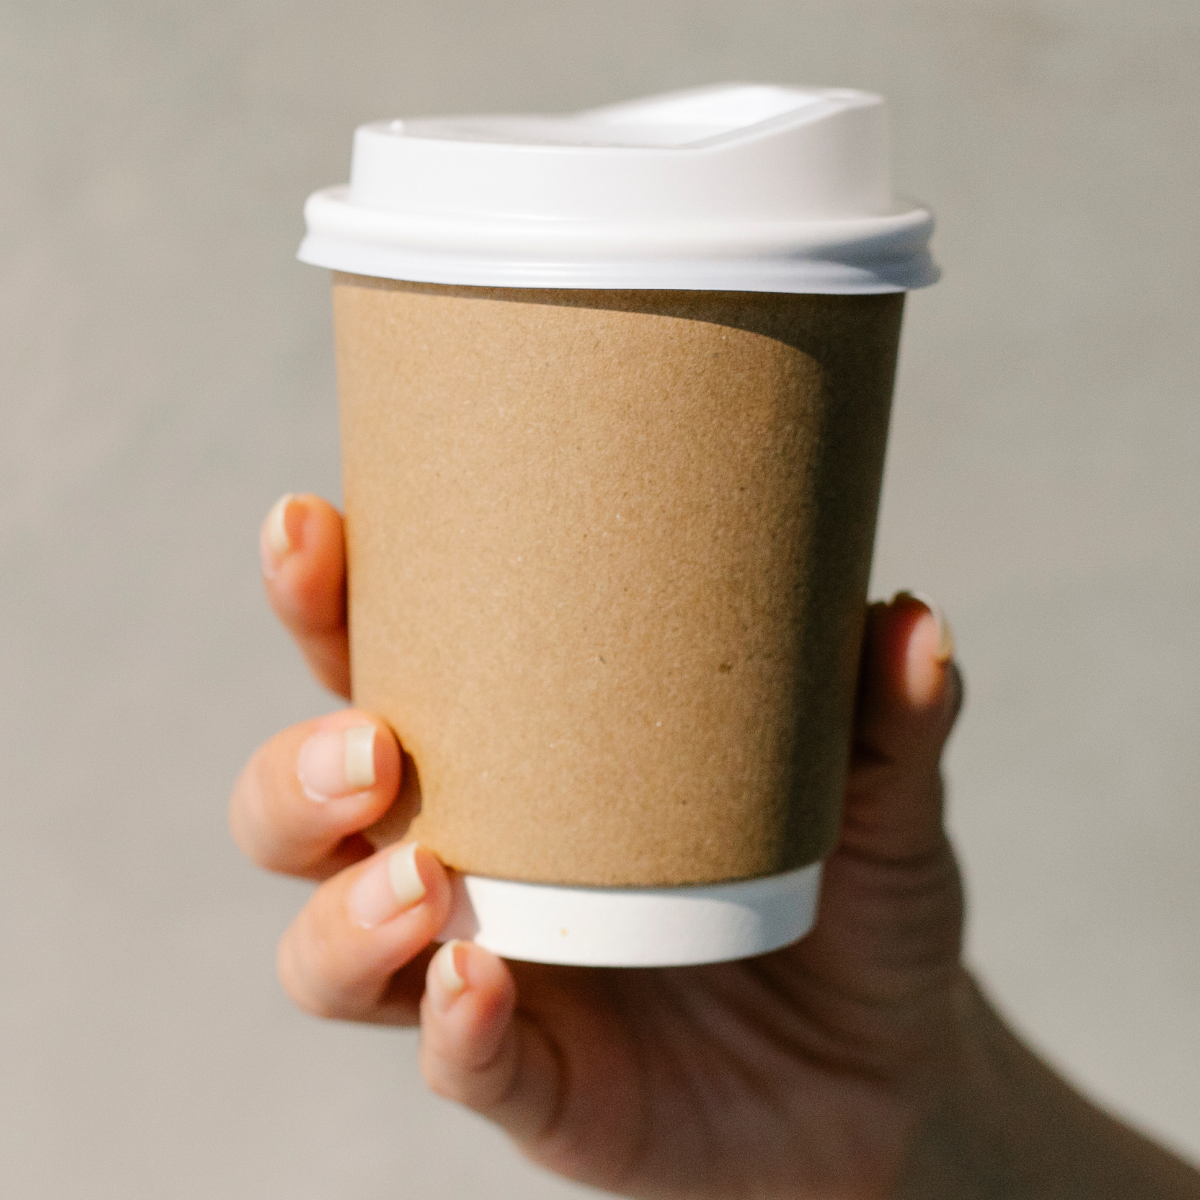 Exciting News! Learn about our "Recycle Paper Cups Initiative"